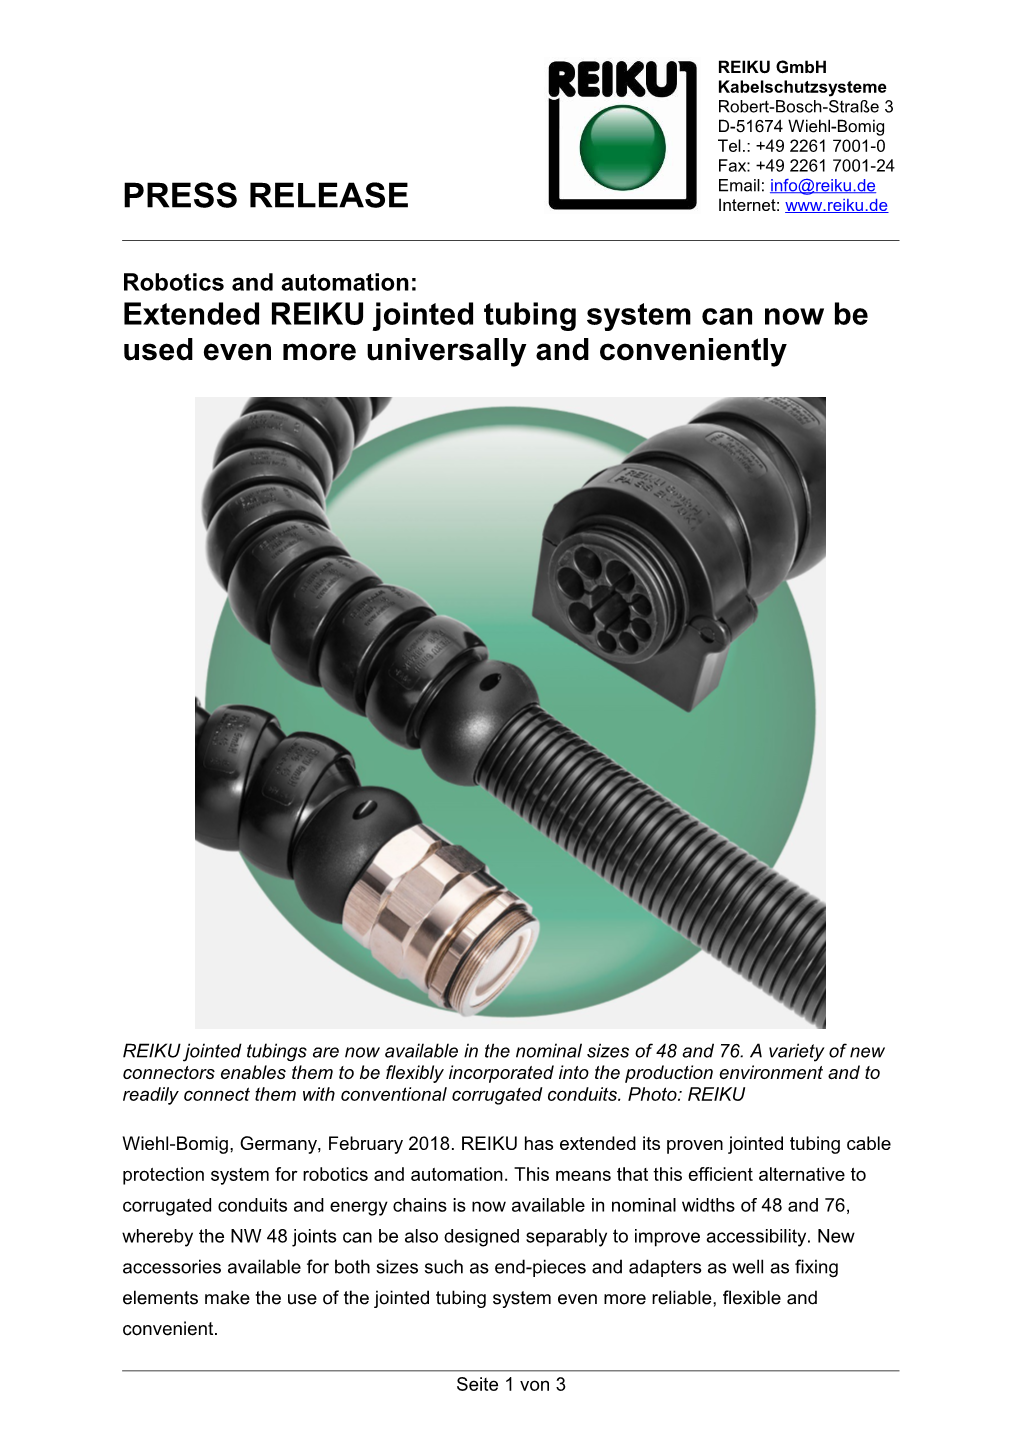 Robotics and Automation: Extended REIKU Jointed Tubing System Can Now Be Used Even More